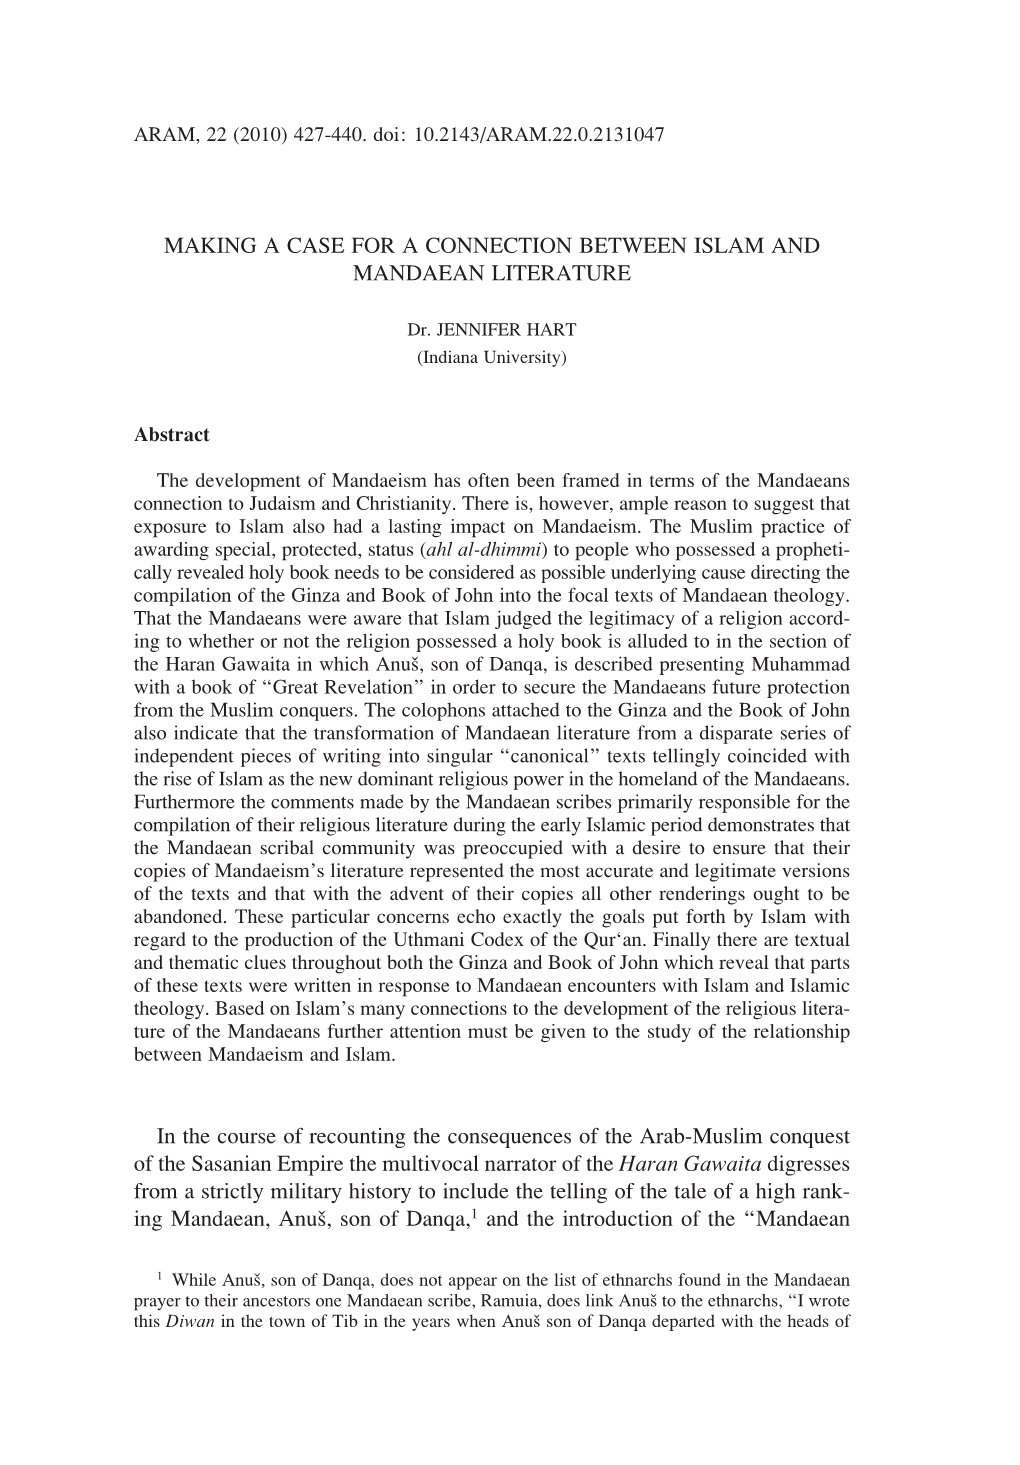 Making a Case for a Connection Between Islam and Mandaean Literature